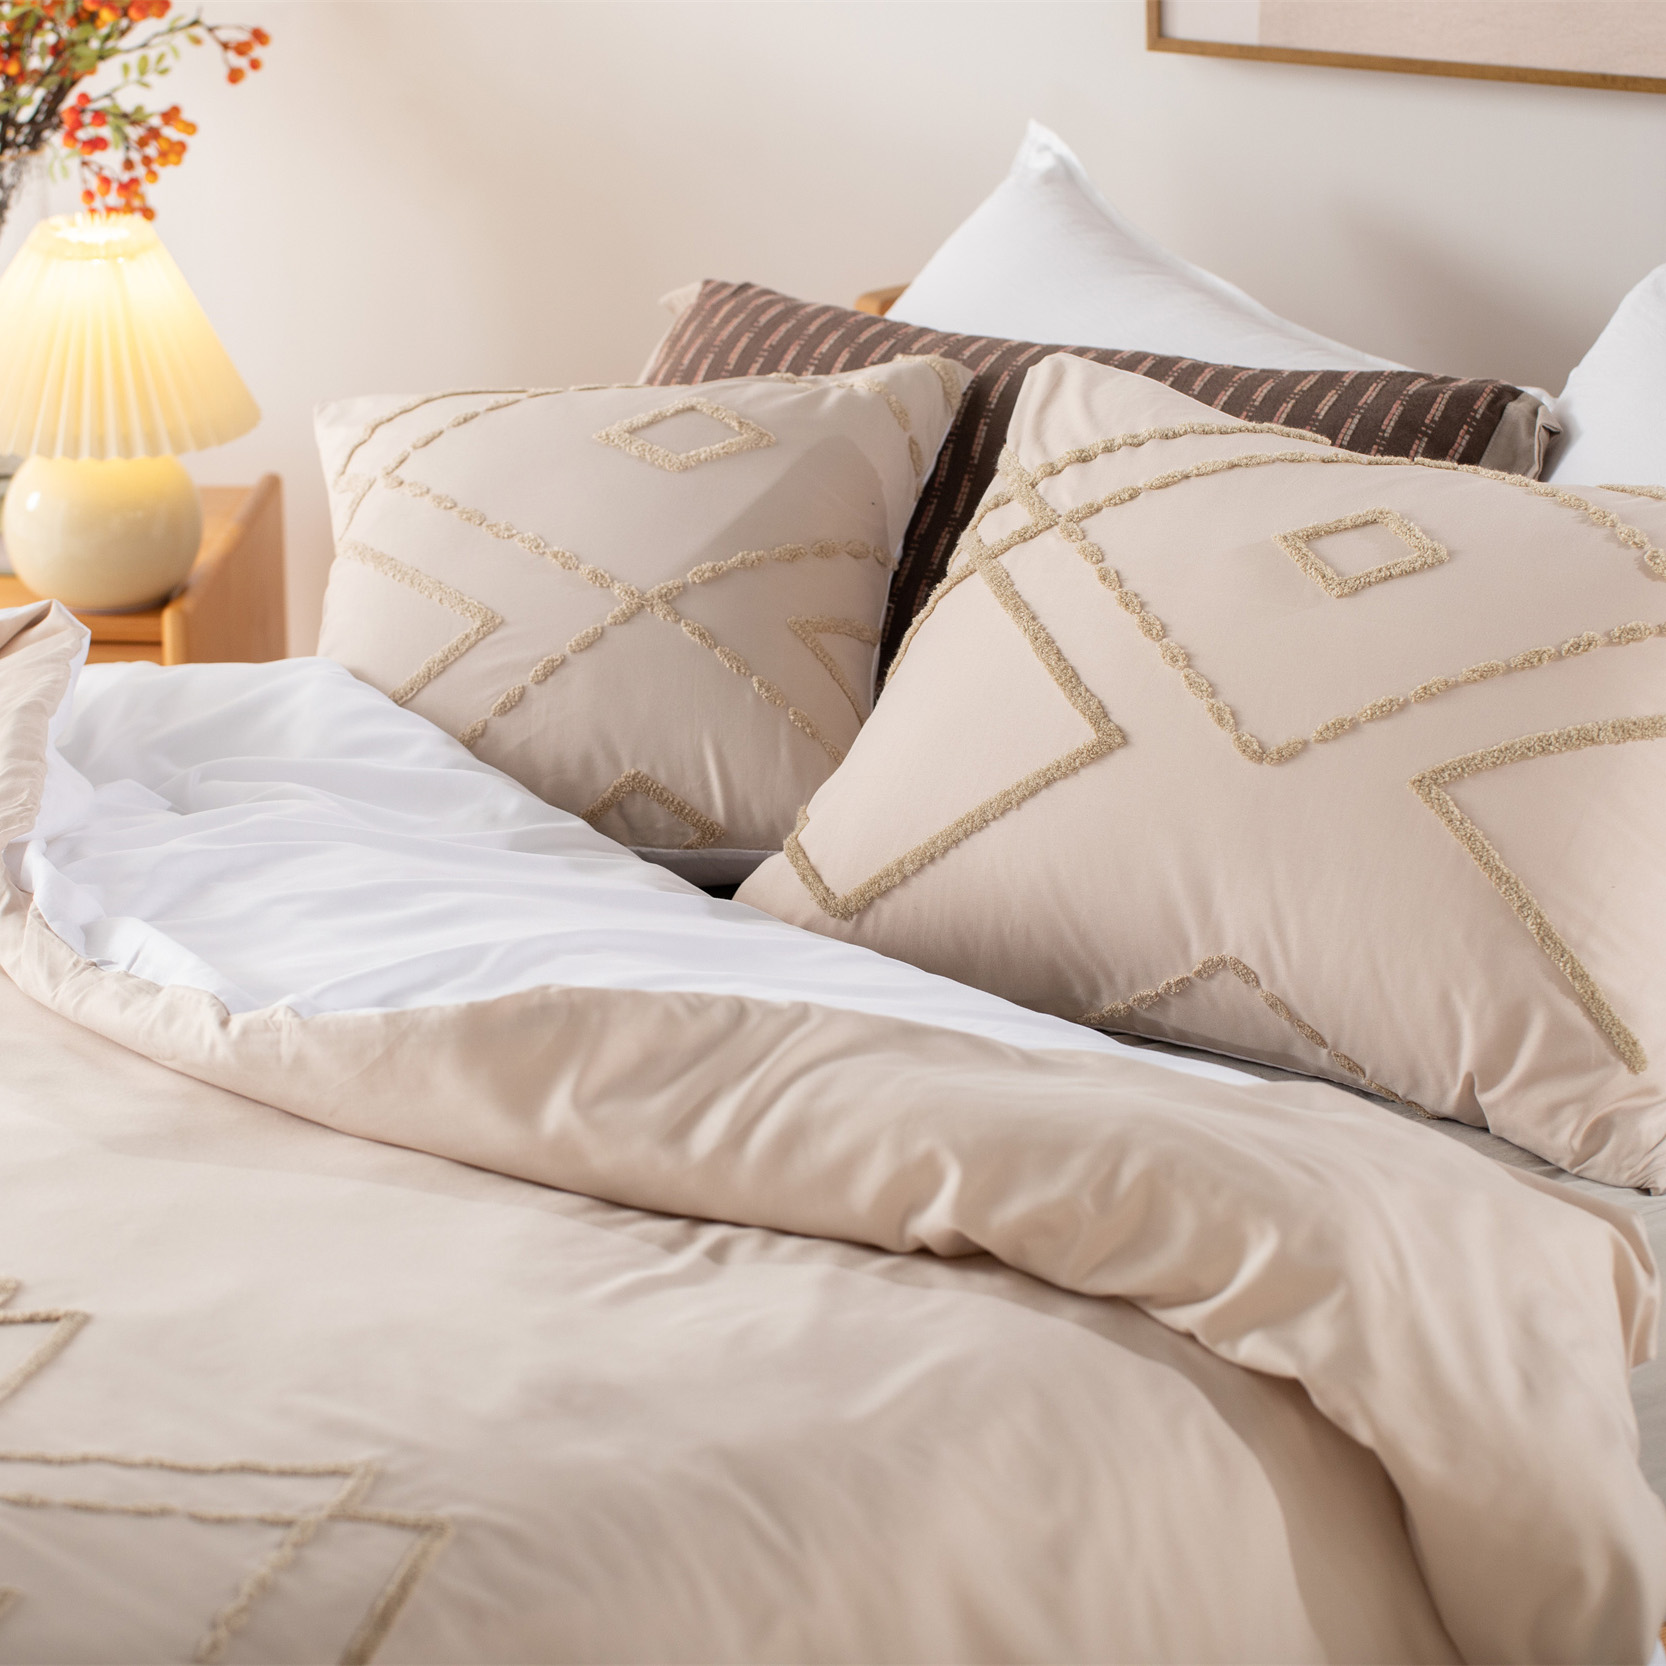 Delight Home Tufted embroidery duvet cover